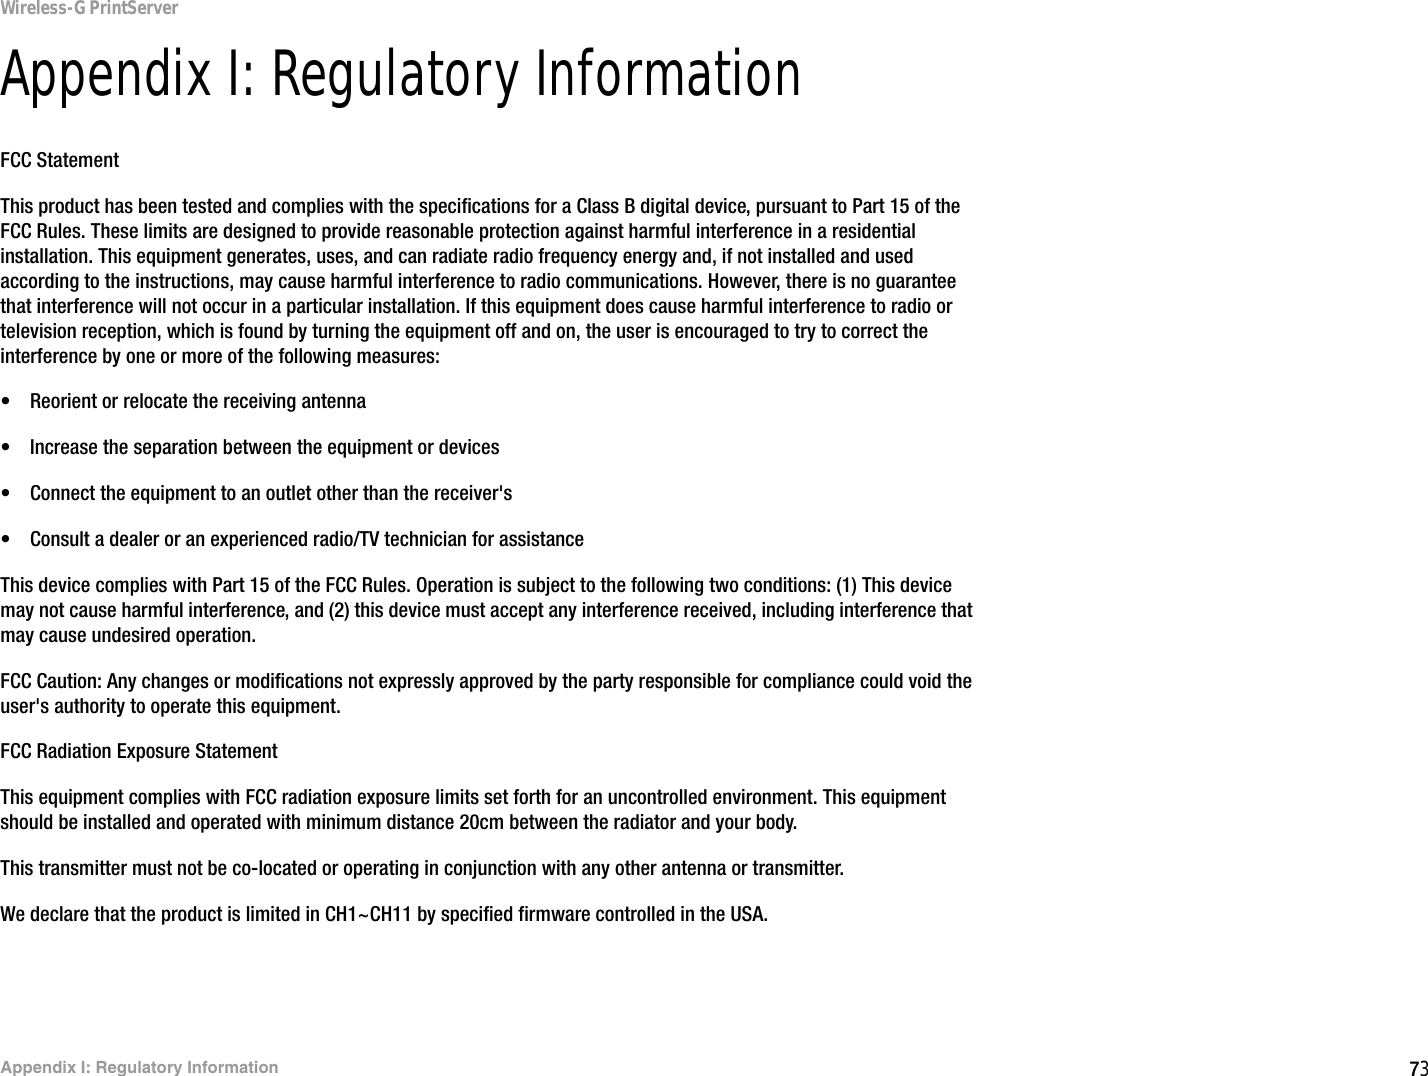 73Appendix I: Regulatory InformationWireless-G PrintServerAppendix I: Regulatory InformationFCC StatementThis product has been tested and complies with the specifications for a Class B digital device, pursuant to Part 15 of the FCC Rules. These limits are designed to provide reasonable protection against harmful interference in a residential installation. This equipment generates, uses, and can radiate radio frequency energy and, if not installed and used according to the instructions, may cause harmful interference to radio communications. However, there is no guarantee that interference will not occur in a particular installation. If this equipment does cause harmful interference to radio or television reception, which is found by turning the equipment off and on, the user is encouraged to try to correct the interference by one or more of the following measures:• Reorient or relocate the receiving antenna• Increase the separation between the equipment or devices• Connect the equipment to an outlet other than the receiver&apos;s• Consult a dealer or an experienced radio/TV technician for assistanceThis device complies with Part 15 of the FCC Rules. Operation is subject to the following two conditions: (1) This device may not cause harmful interference, and (2) this device must accept any interference received, including interference that may cause undesired operation.FCC Caution: Any changes or modifications not expressly approved by the party responsible for compliance could void the user&apos;s authority to operate this equipment.FCC Radiation Exposure StatementThis equipment complies with FCC radiation exposure limits set forth for an uncontrolled environment. This equipment should be installed and operated with minimum distance 20cm between the radiator and your body.This transmitter must not be co-located or operating in conjunction with any other antenna or transmitter.We declare that the product is limited in CH1~CH11 by specified firmware controlled in the USA.